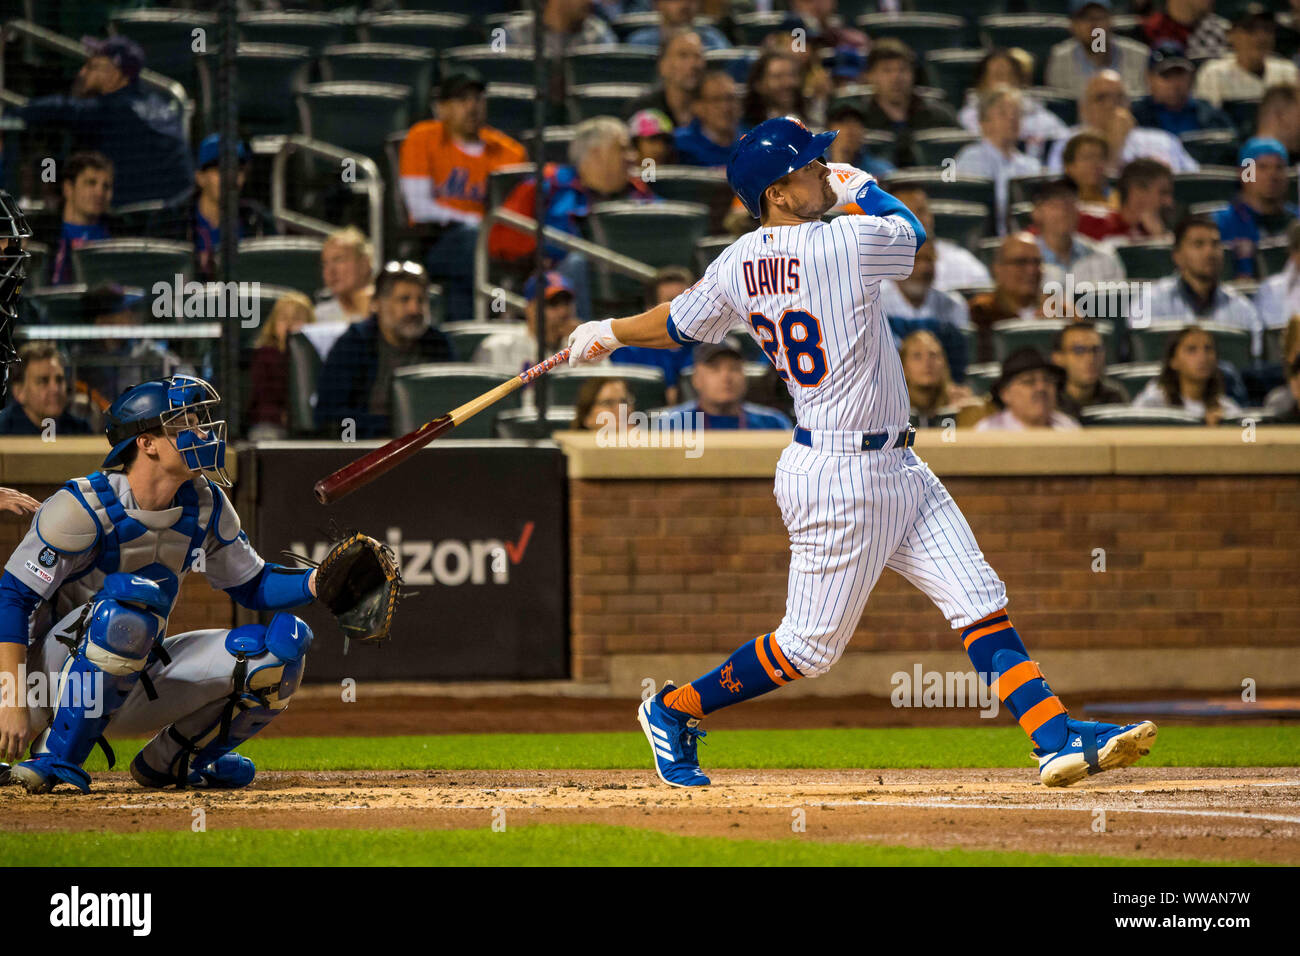 Queens, New York, USA. 13th Sep, 2019. New York Mets third baseman J.D. Davis (28) looks on after hitting a home run during the game between The New York Mets and The Los Angeles Dodgers at Citi Field in Queens, New York. Mandatory credit: Kostas Lymperopoulos/CSM/Alamy Live News Stock Photo